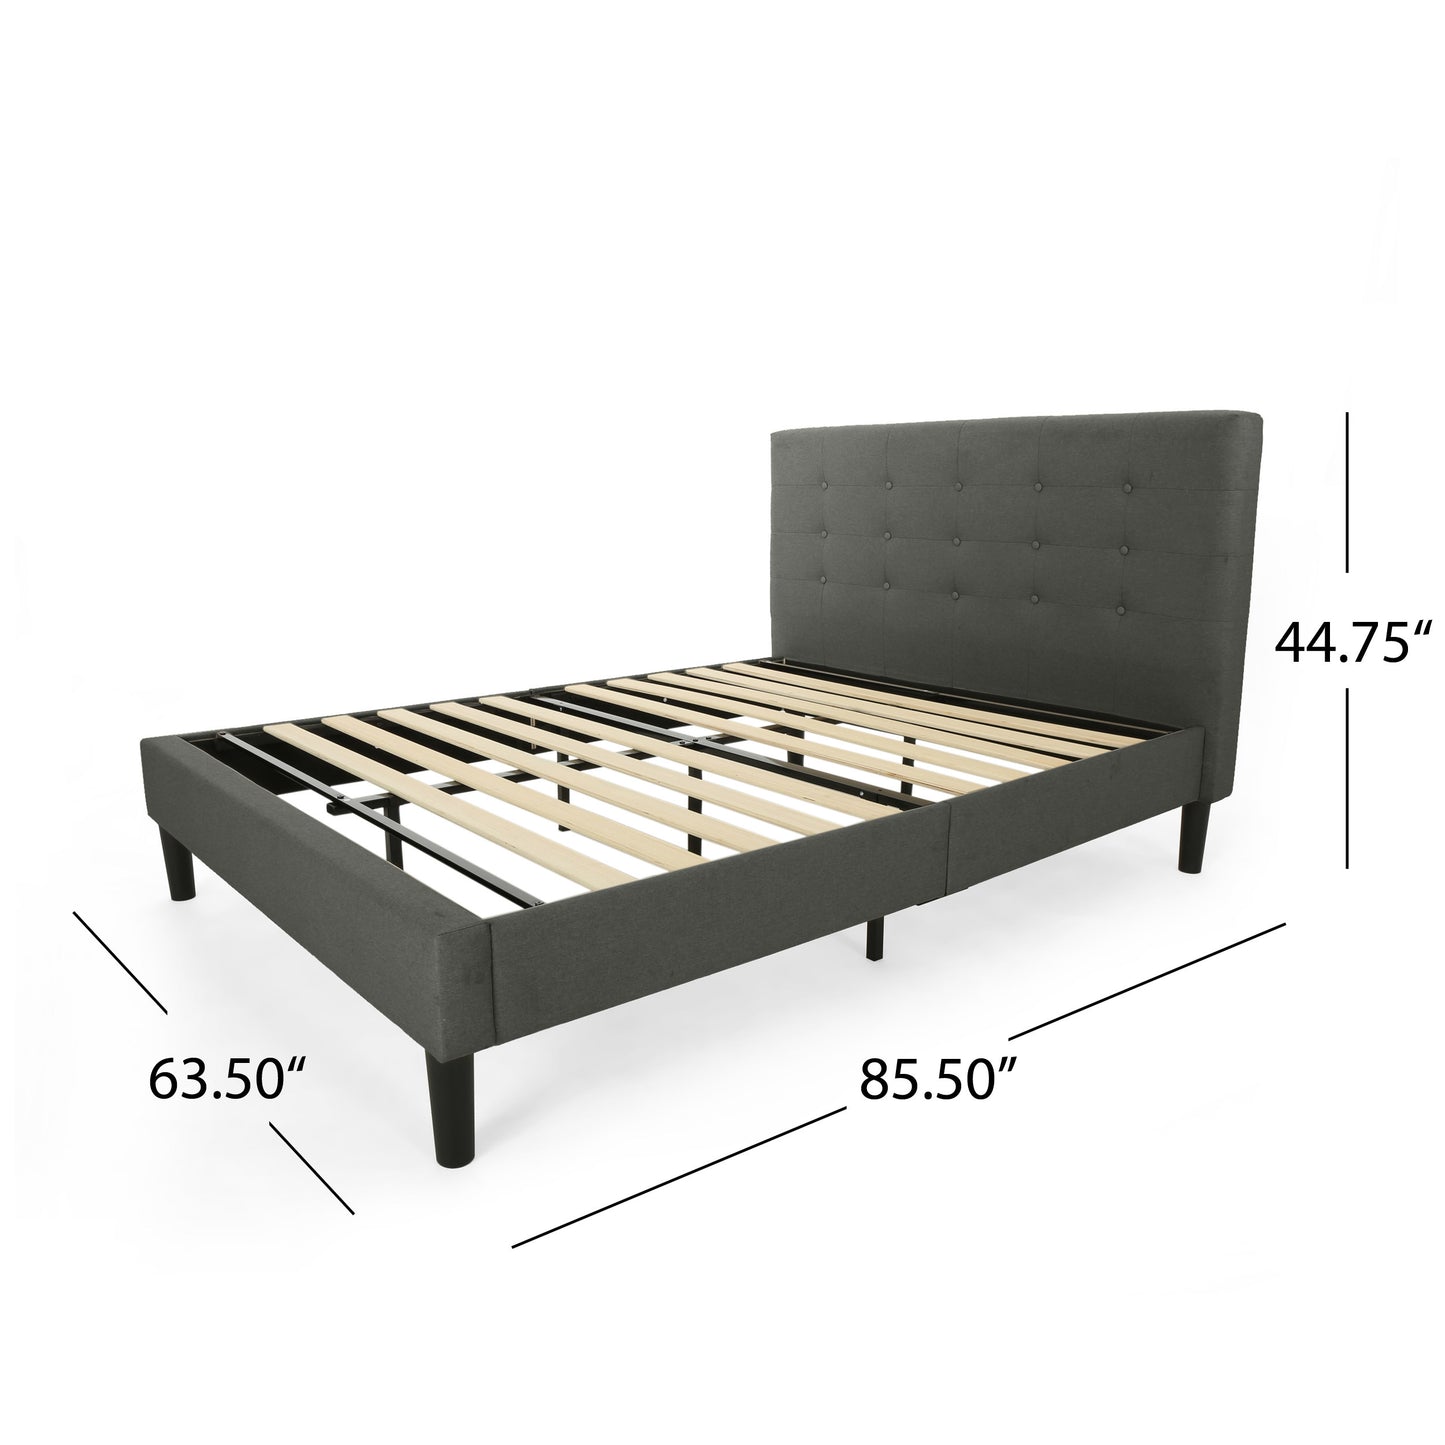 Gloria Fully-Upholstered Queen-Size Platform Bed Frame, Modern, Contemporary, Low-Profile